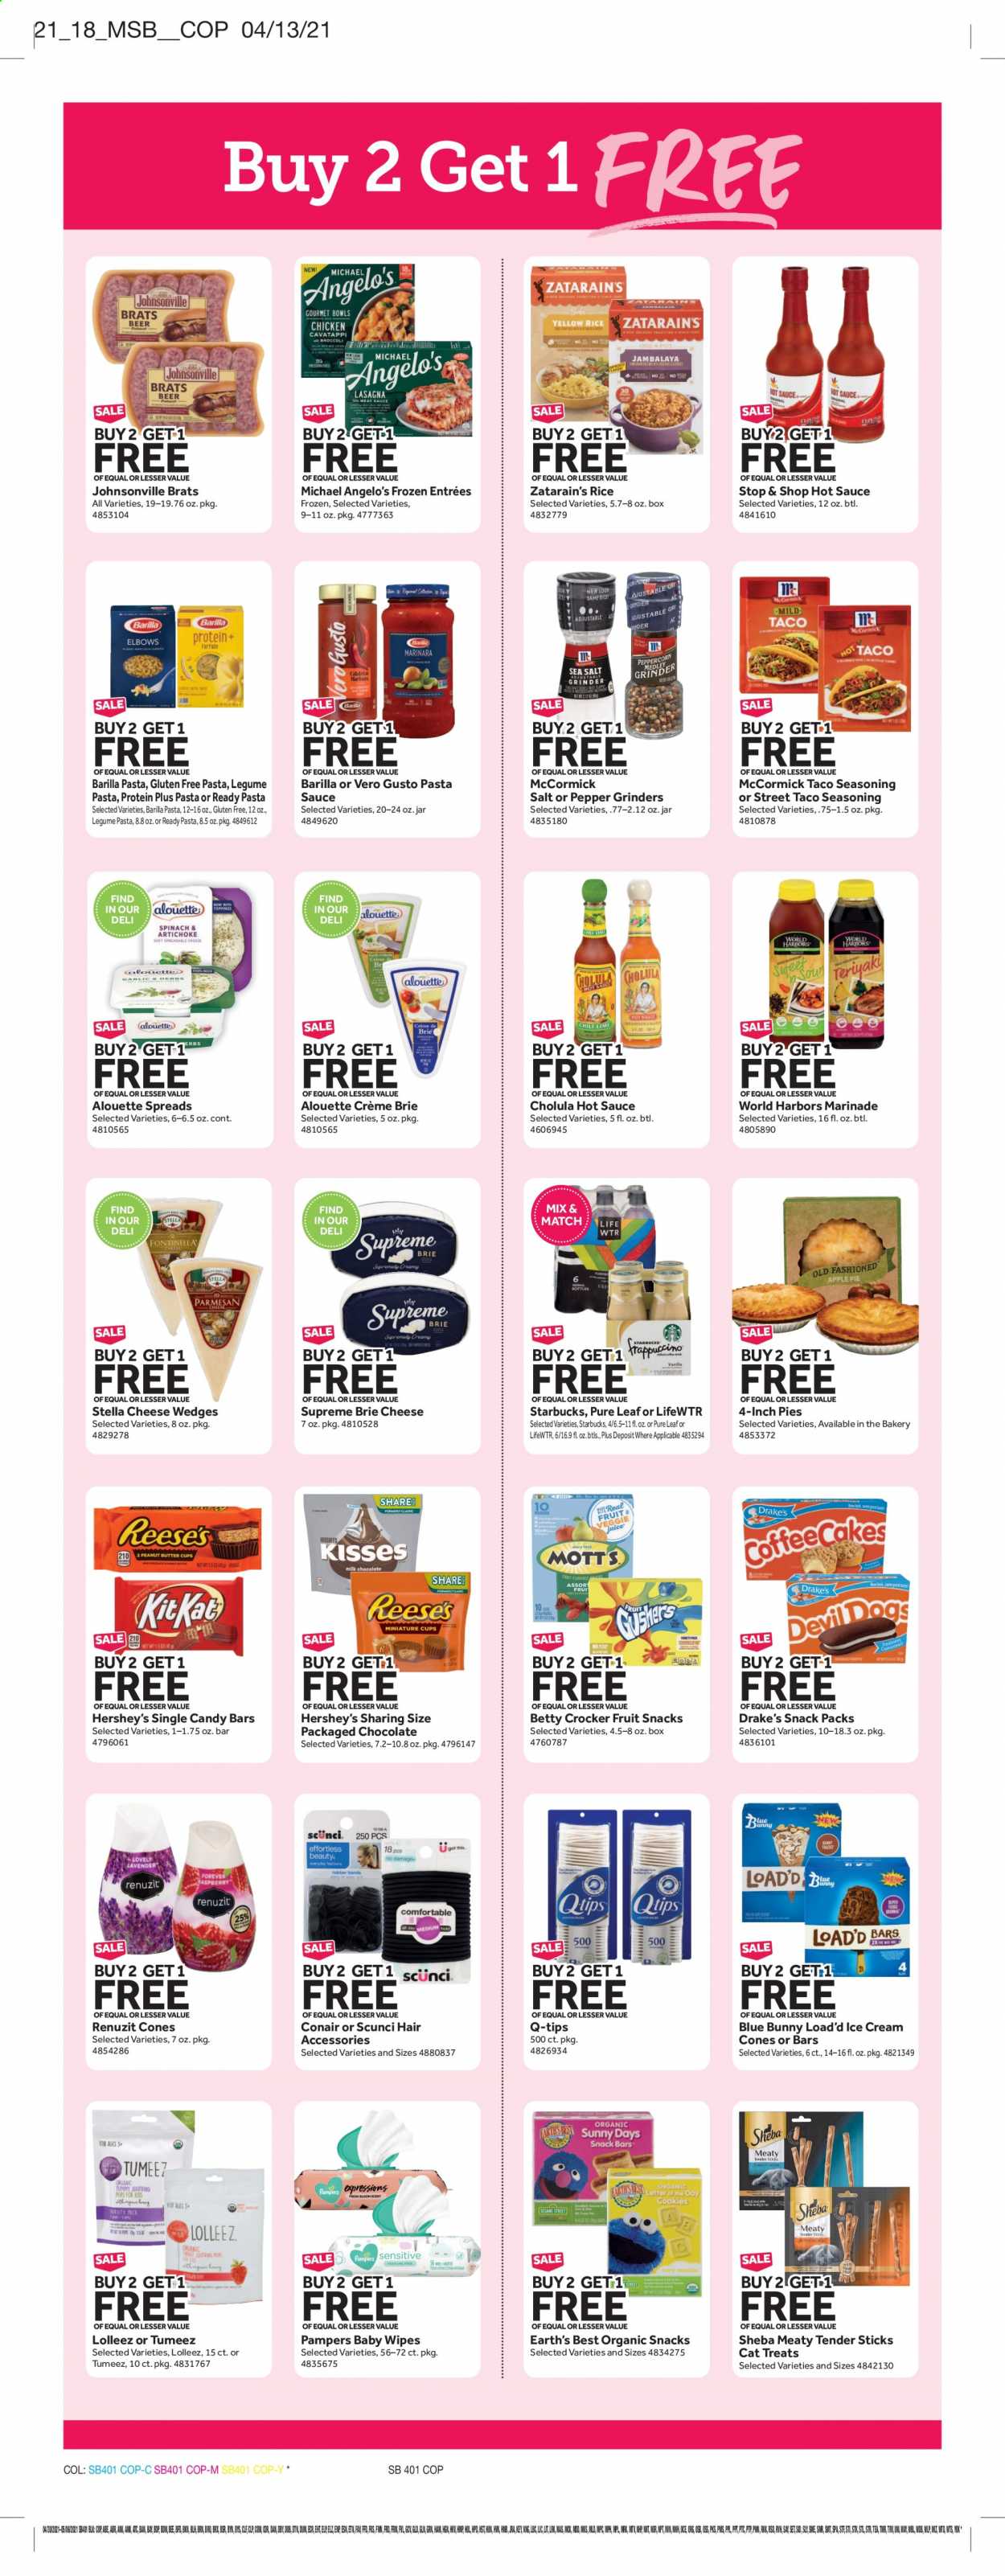 thumbnail - Stop & Shop Flyer - 04/30/2021 - 05/06/2021 - Sales products - Johnsonville, pasta sauce, sauce, Barilla, ham, cheese, brie, ice cream, Hershey's, Blue Bunny, chocolate, fruit snack, salt, rice, spice, hot sauce, marinade, Lifewtr, tea, Pure Leaf, Starbucks, wipes, Pampers, baby wipes, Scünci, Renuzit. Page 3.